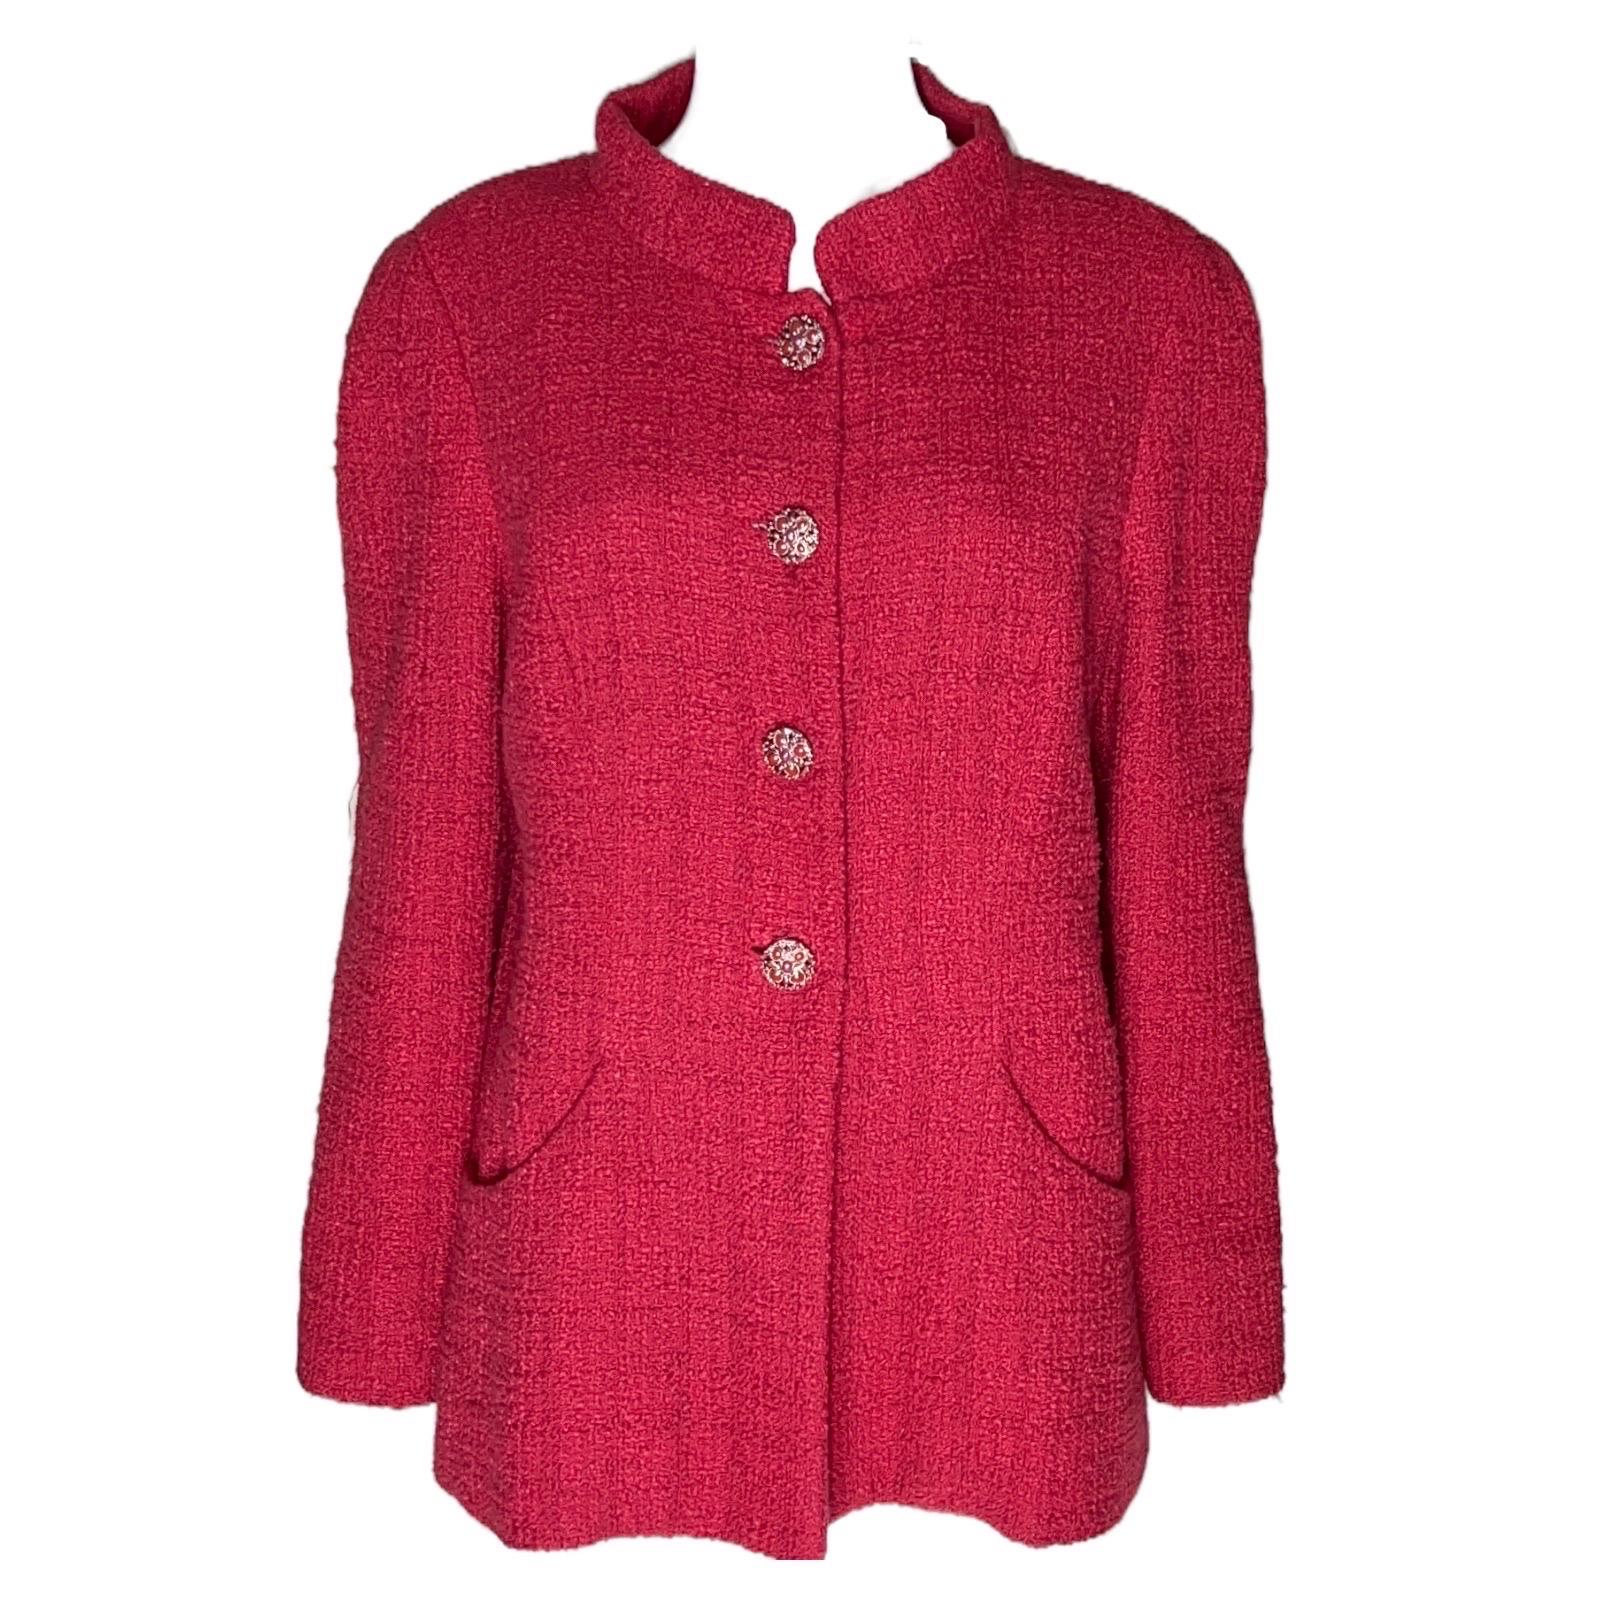 
BEAUTIFUL CHANEL TWEED JACKET

A TRUE CHANEL PIECE THAT SHOULD BE IN EVERY WOMAN'S WARDROBE

SO GORGEOUS

DETAILS:

Perfect to be worn casual with jeans or dressed up - an iconic CHANEL jacket
Beautiful CHANEL tweed jacket 
Red Maison Lesage tweed